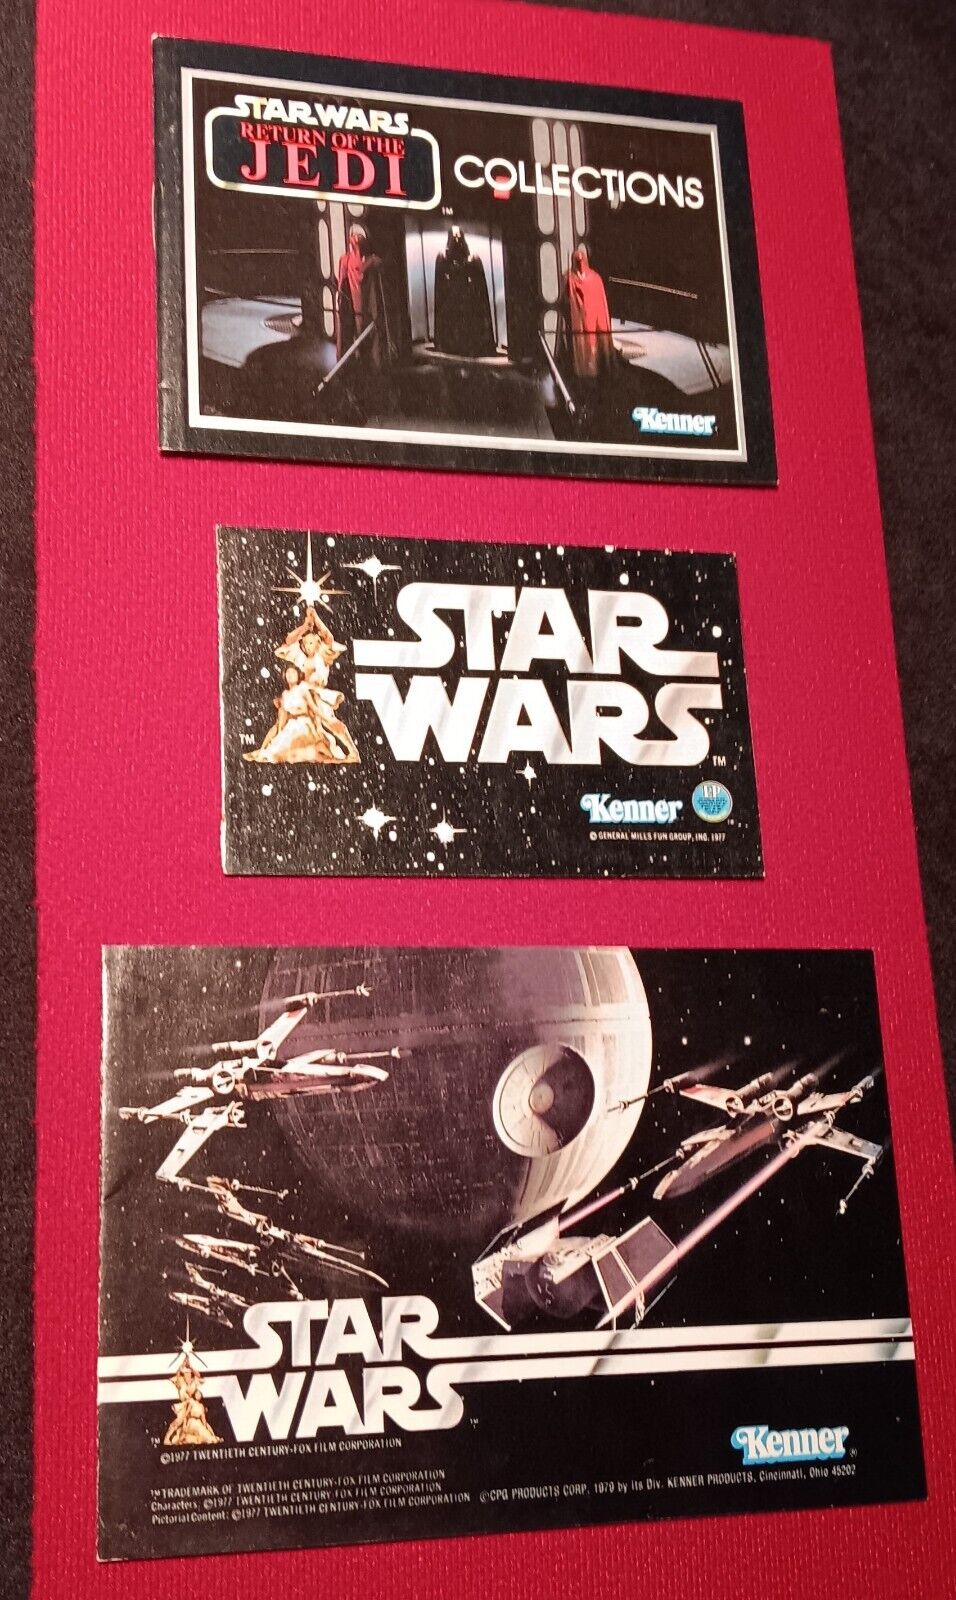 RARE Vintage Star Wars Kenner Toy Booklet Set NM Early Bird